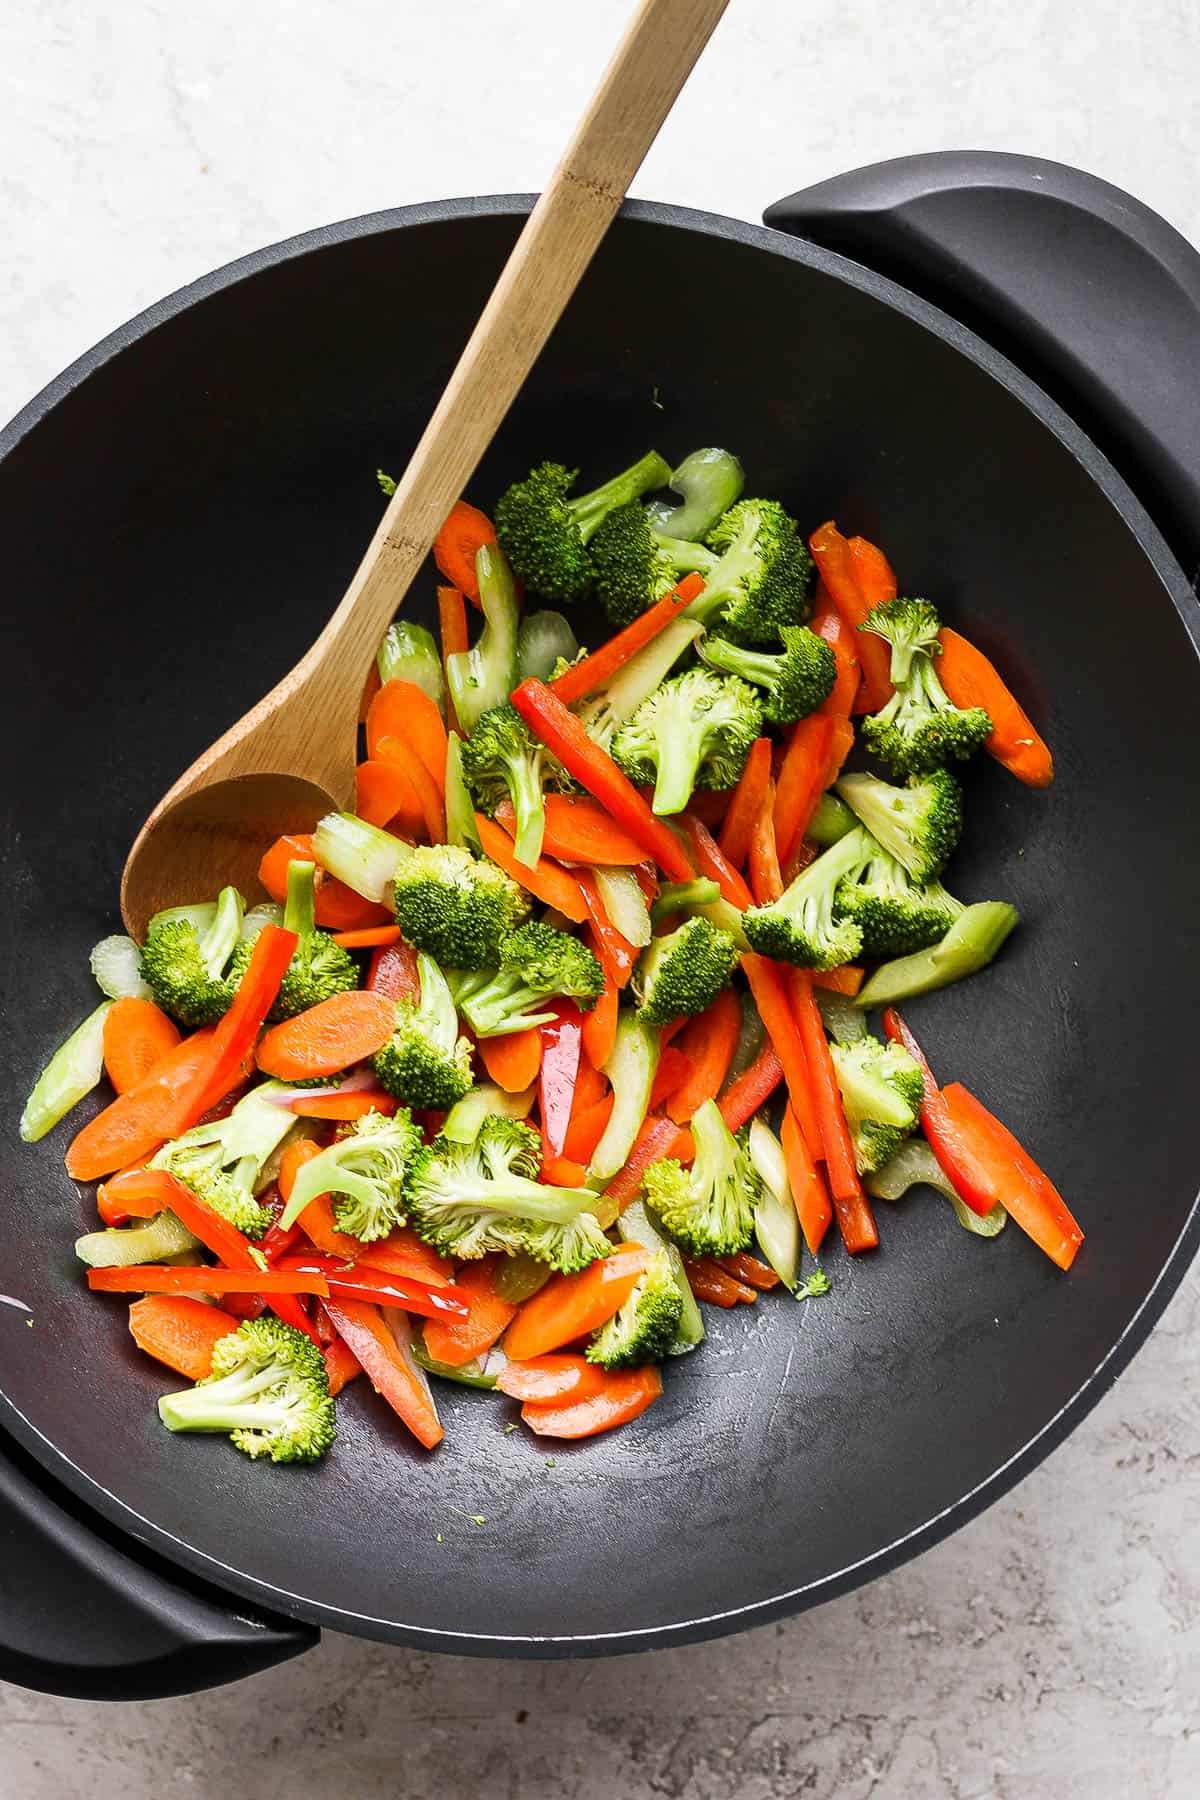 Carrots, bell pepper, celery, and broccoli in a wok.